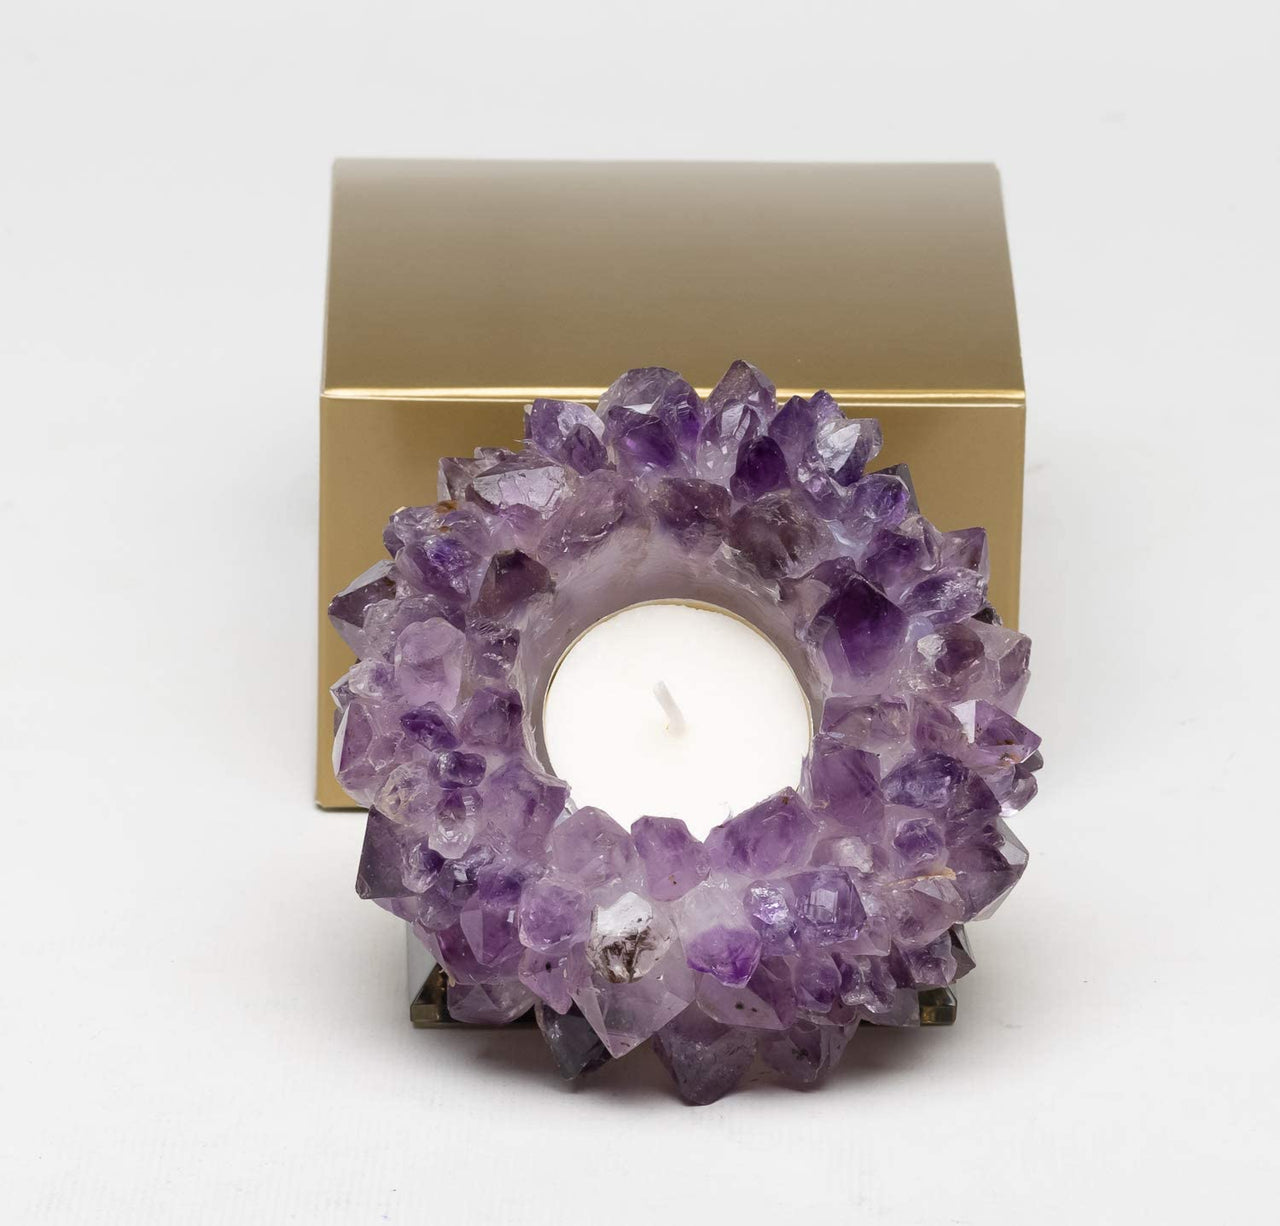 Handmade Brazilian Amethyst Crystal Point Tea Light Candle Holder with Tea Light Candle - Perfect Gift in Gold Box